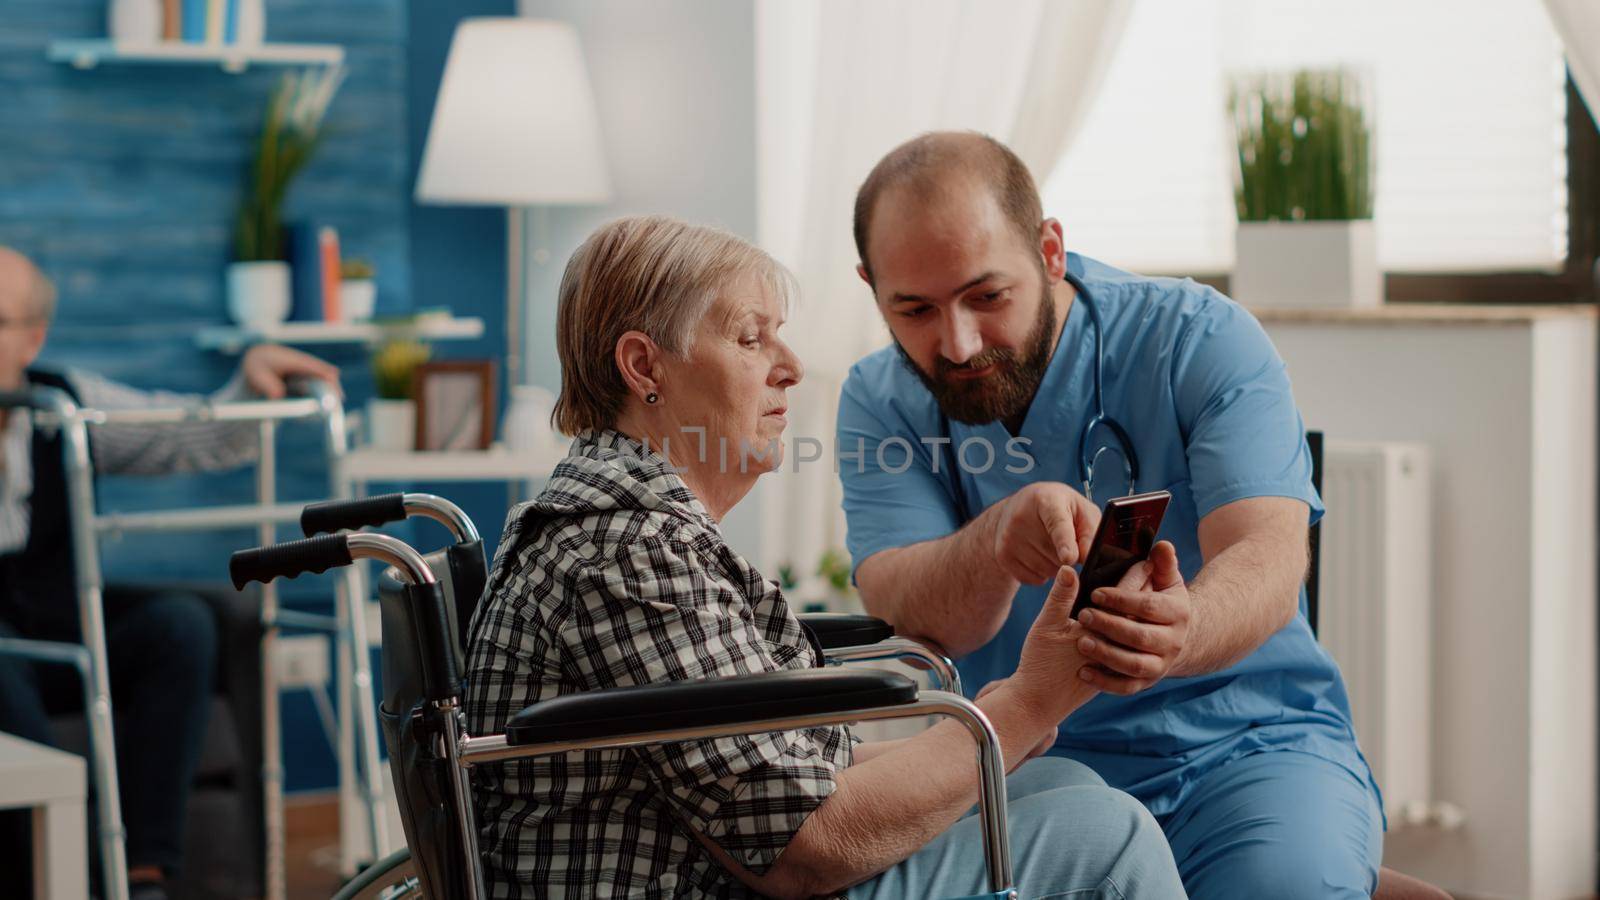 Man nurse teaching retired woman with disability to use smartphone for communication in nursing home. Senior patient sitting in wheelchair learning phone technology with assistance